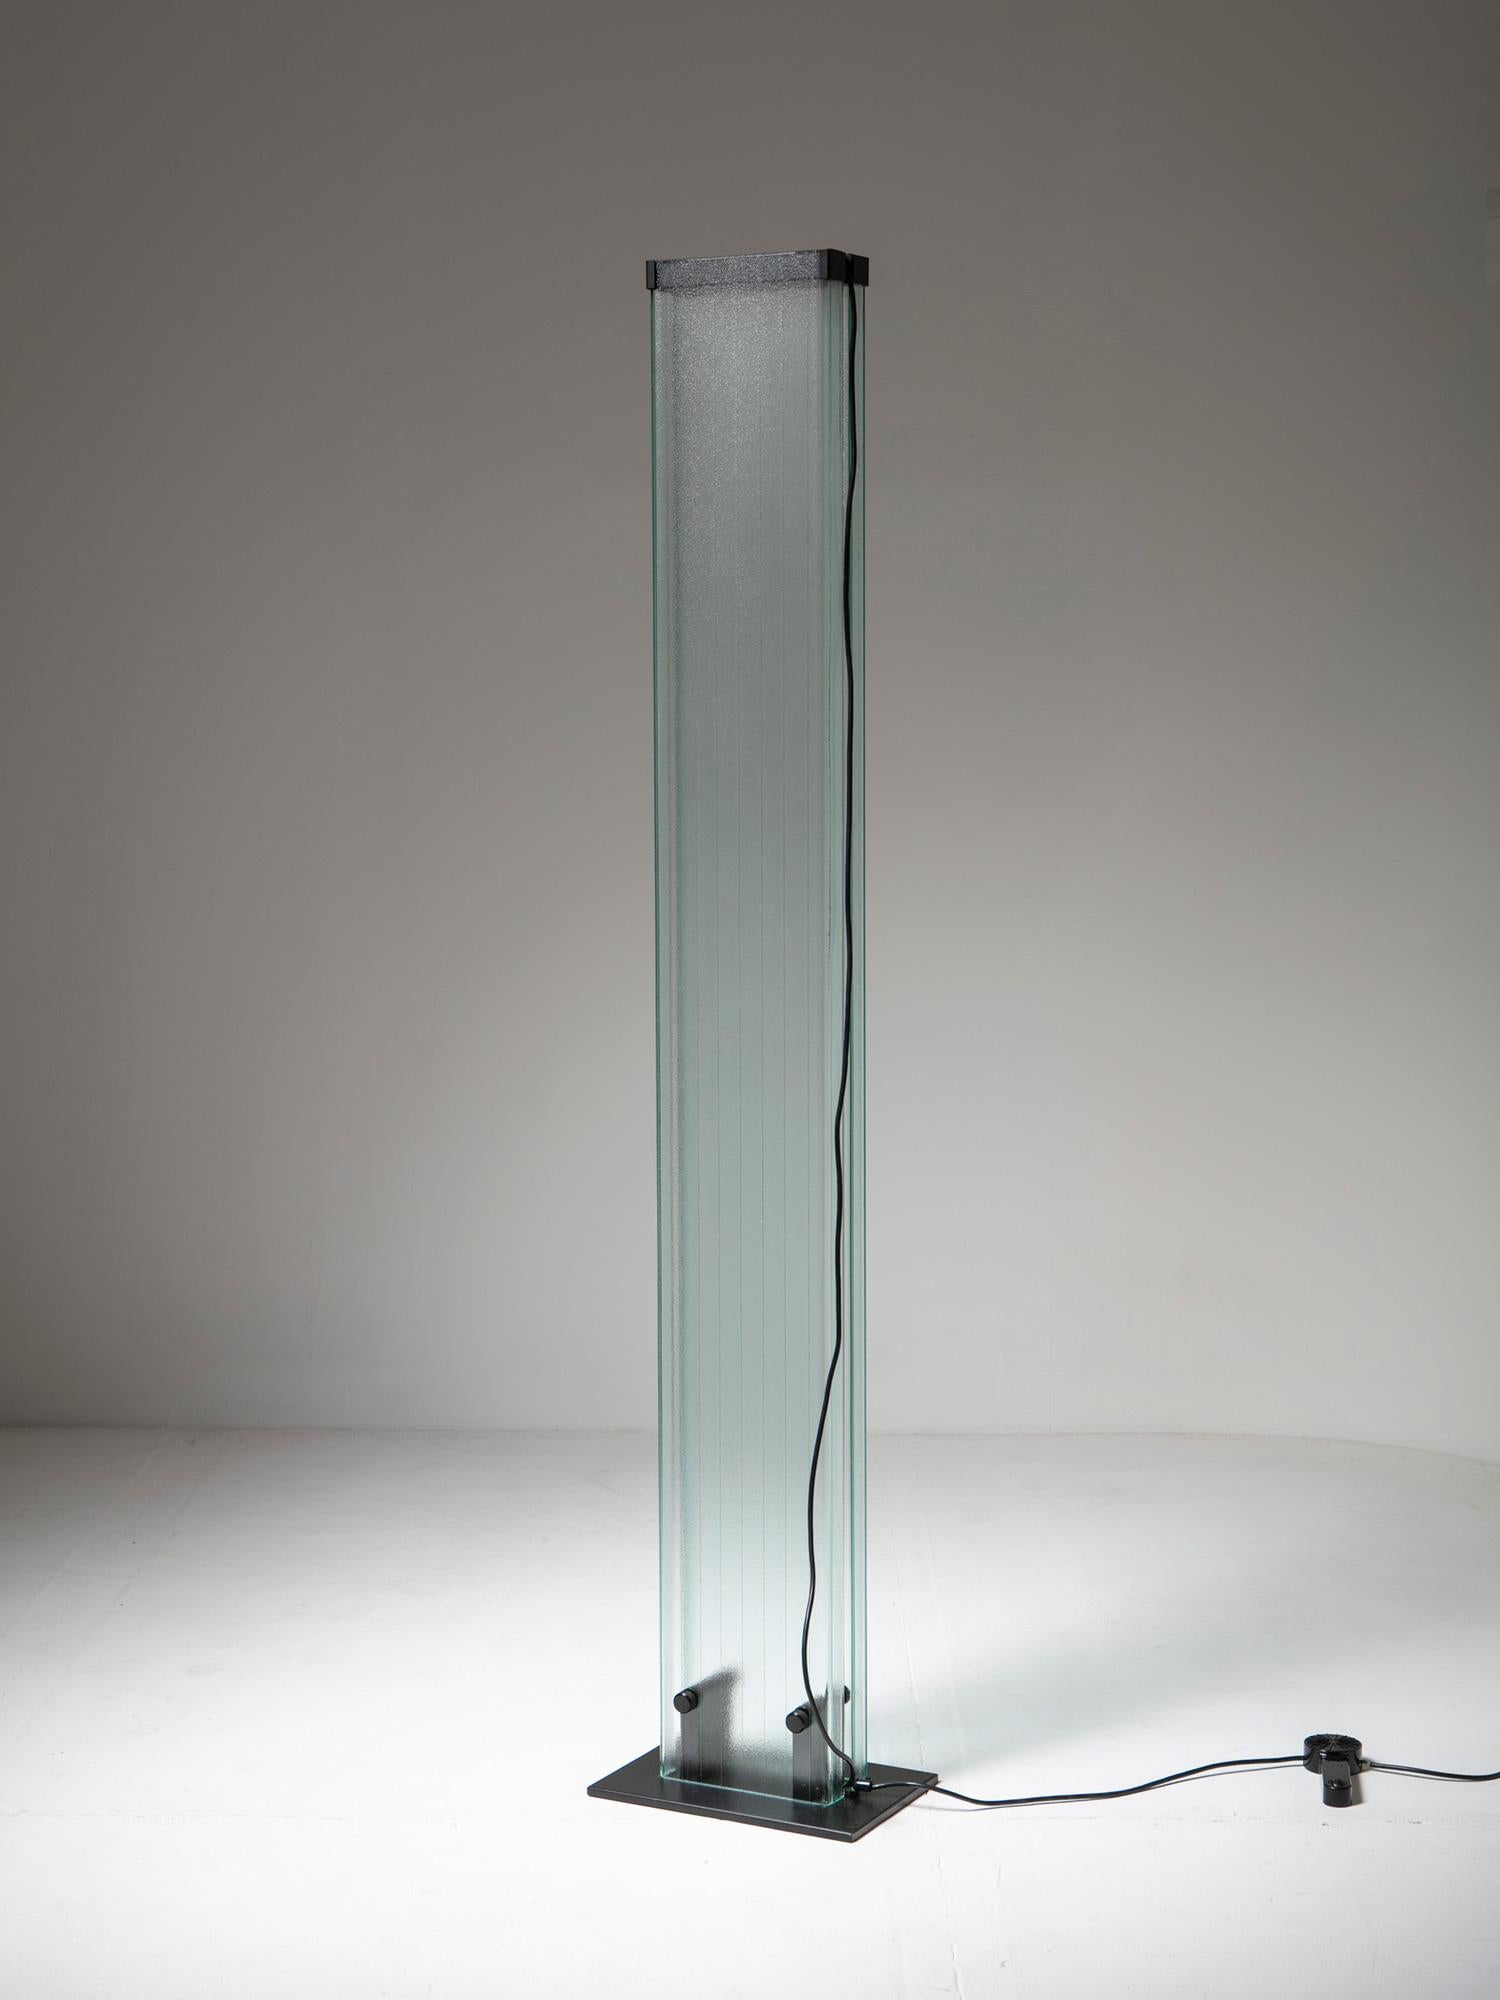 Obscure floor lamp manufactured by Stilnovo.
Halogen light source is supported by two large U-glass beams.